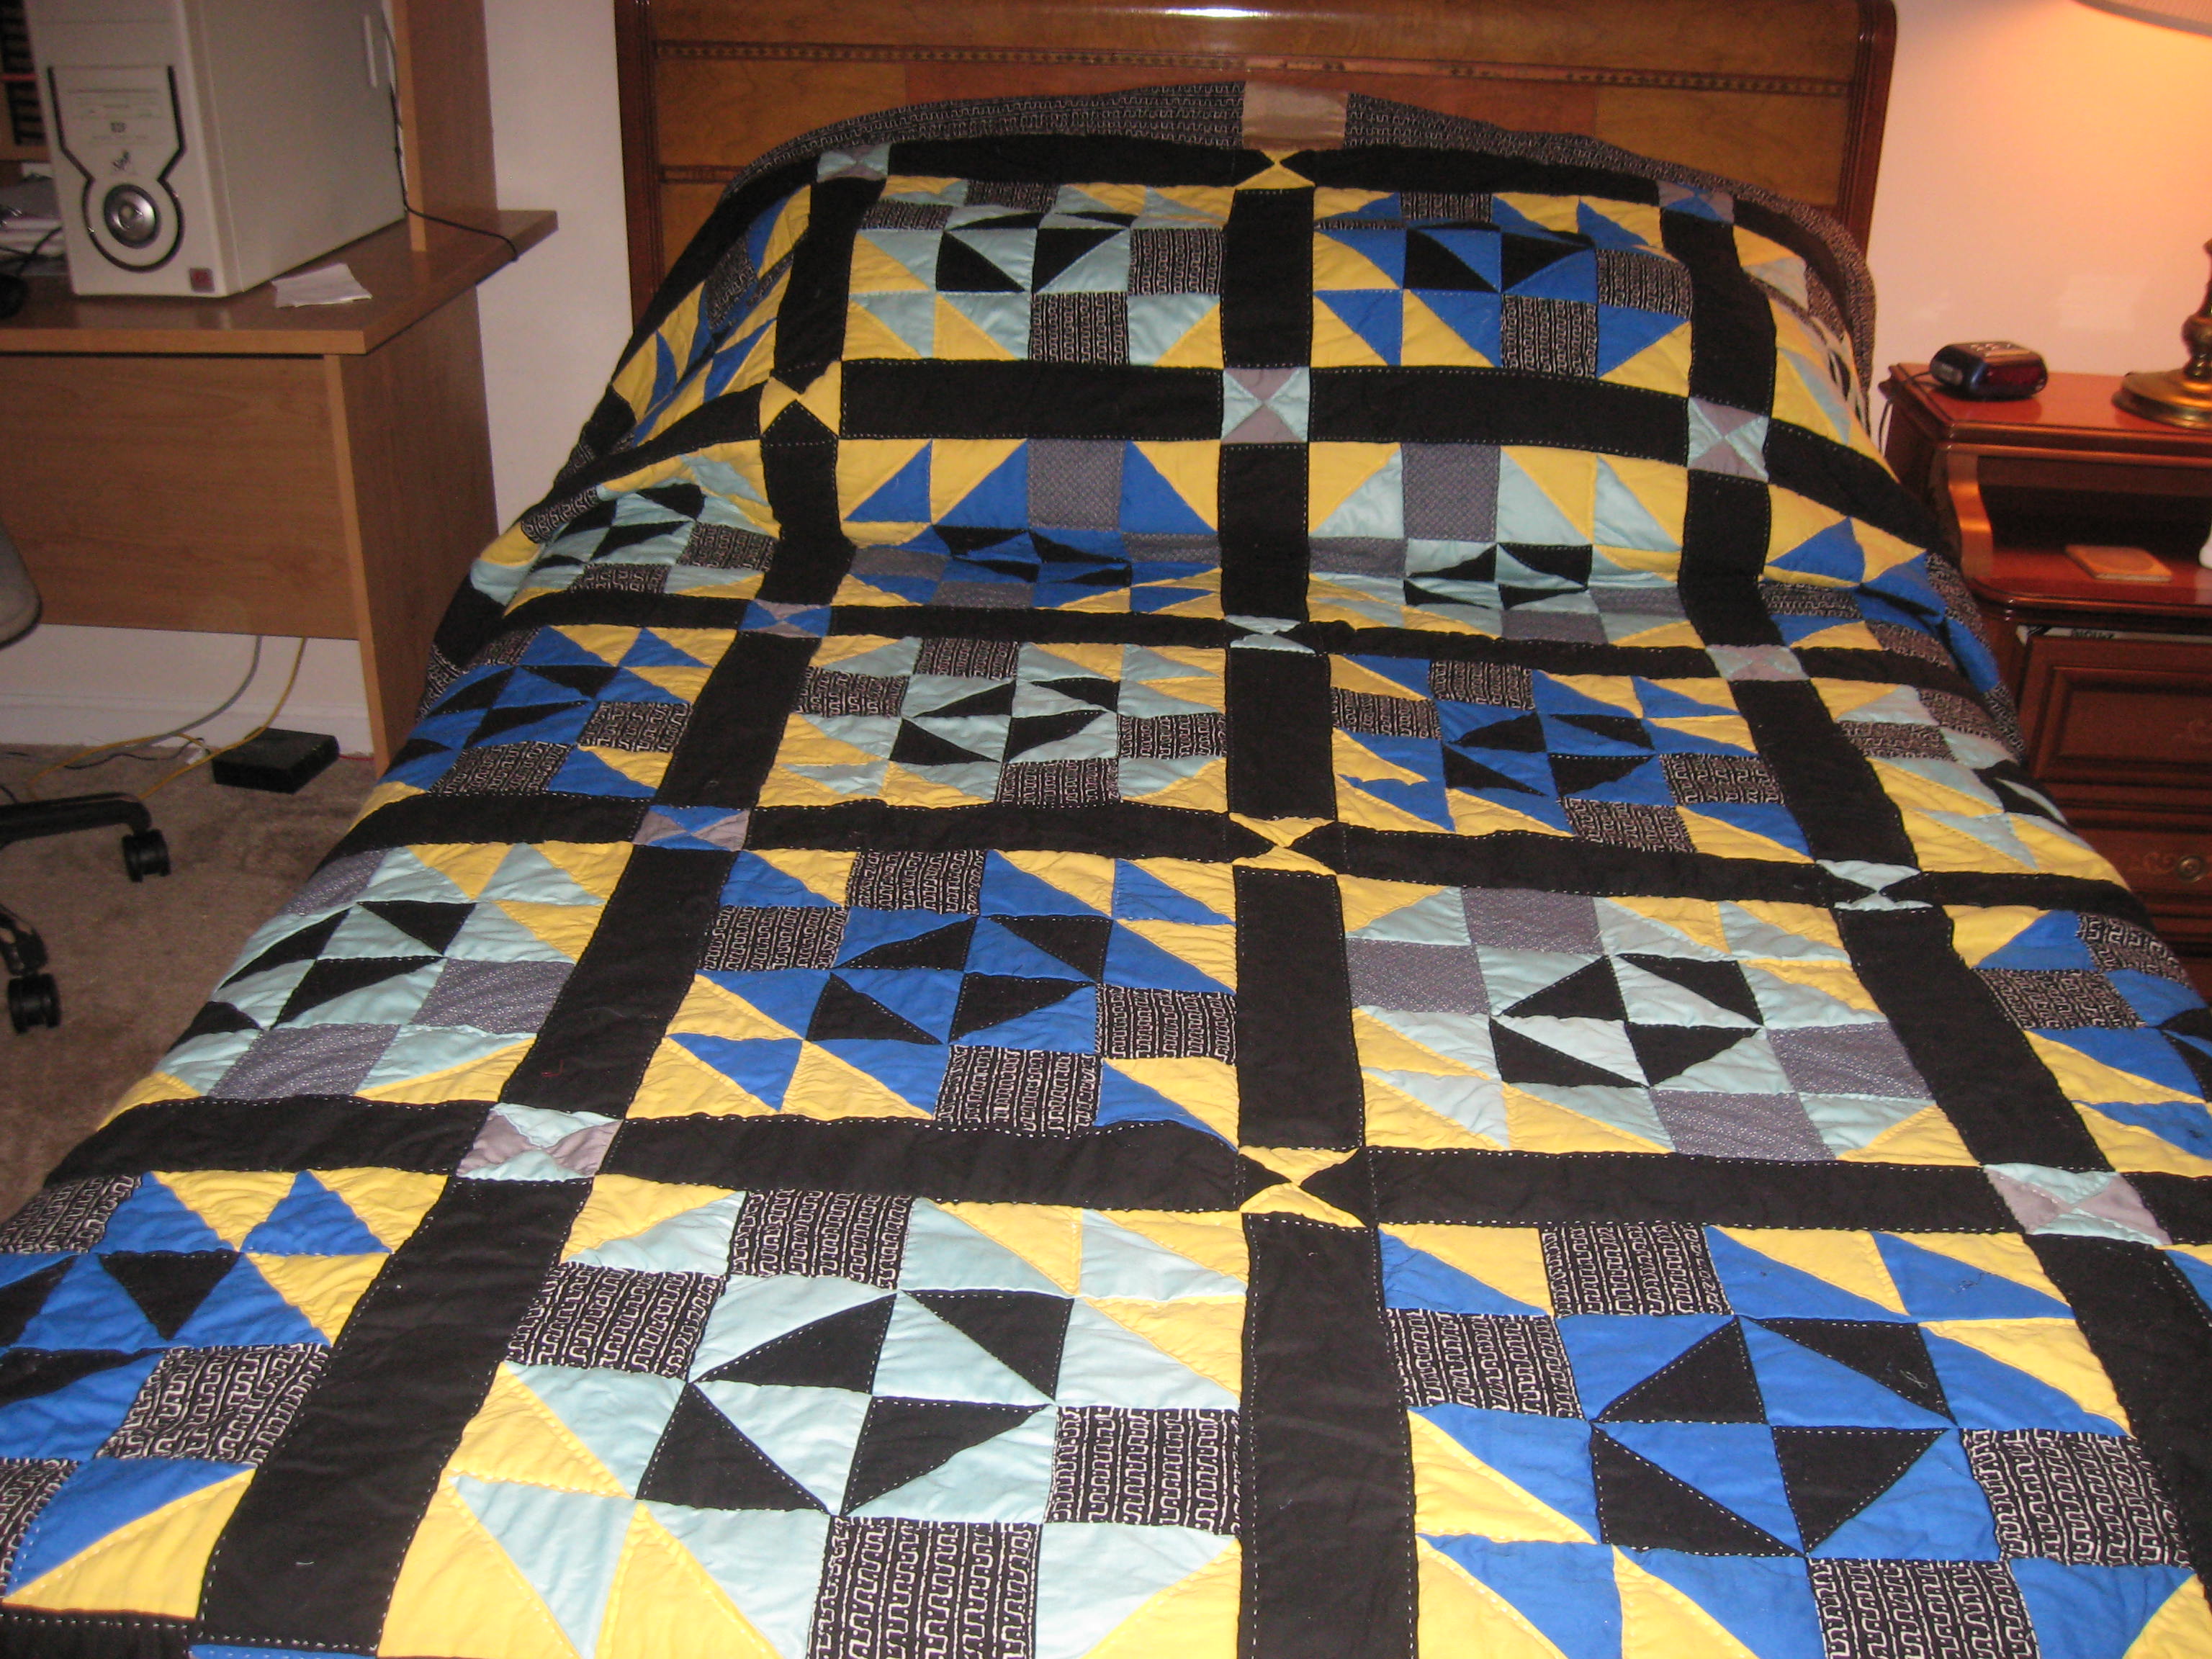 I made this quilt.